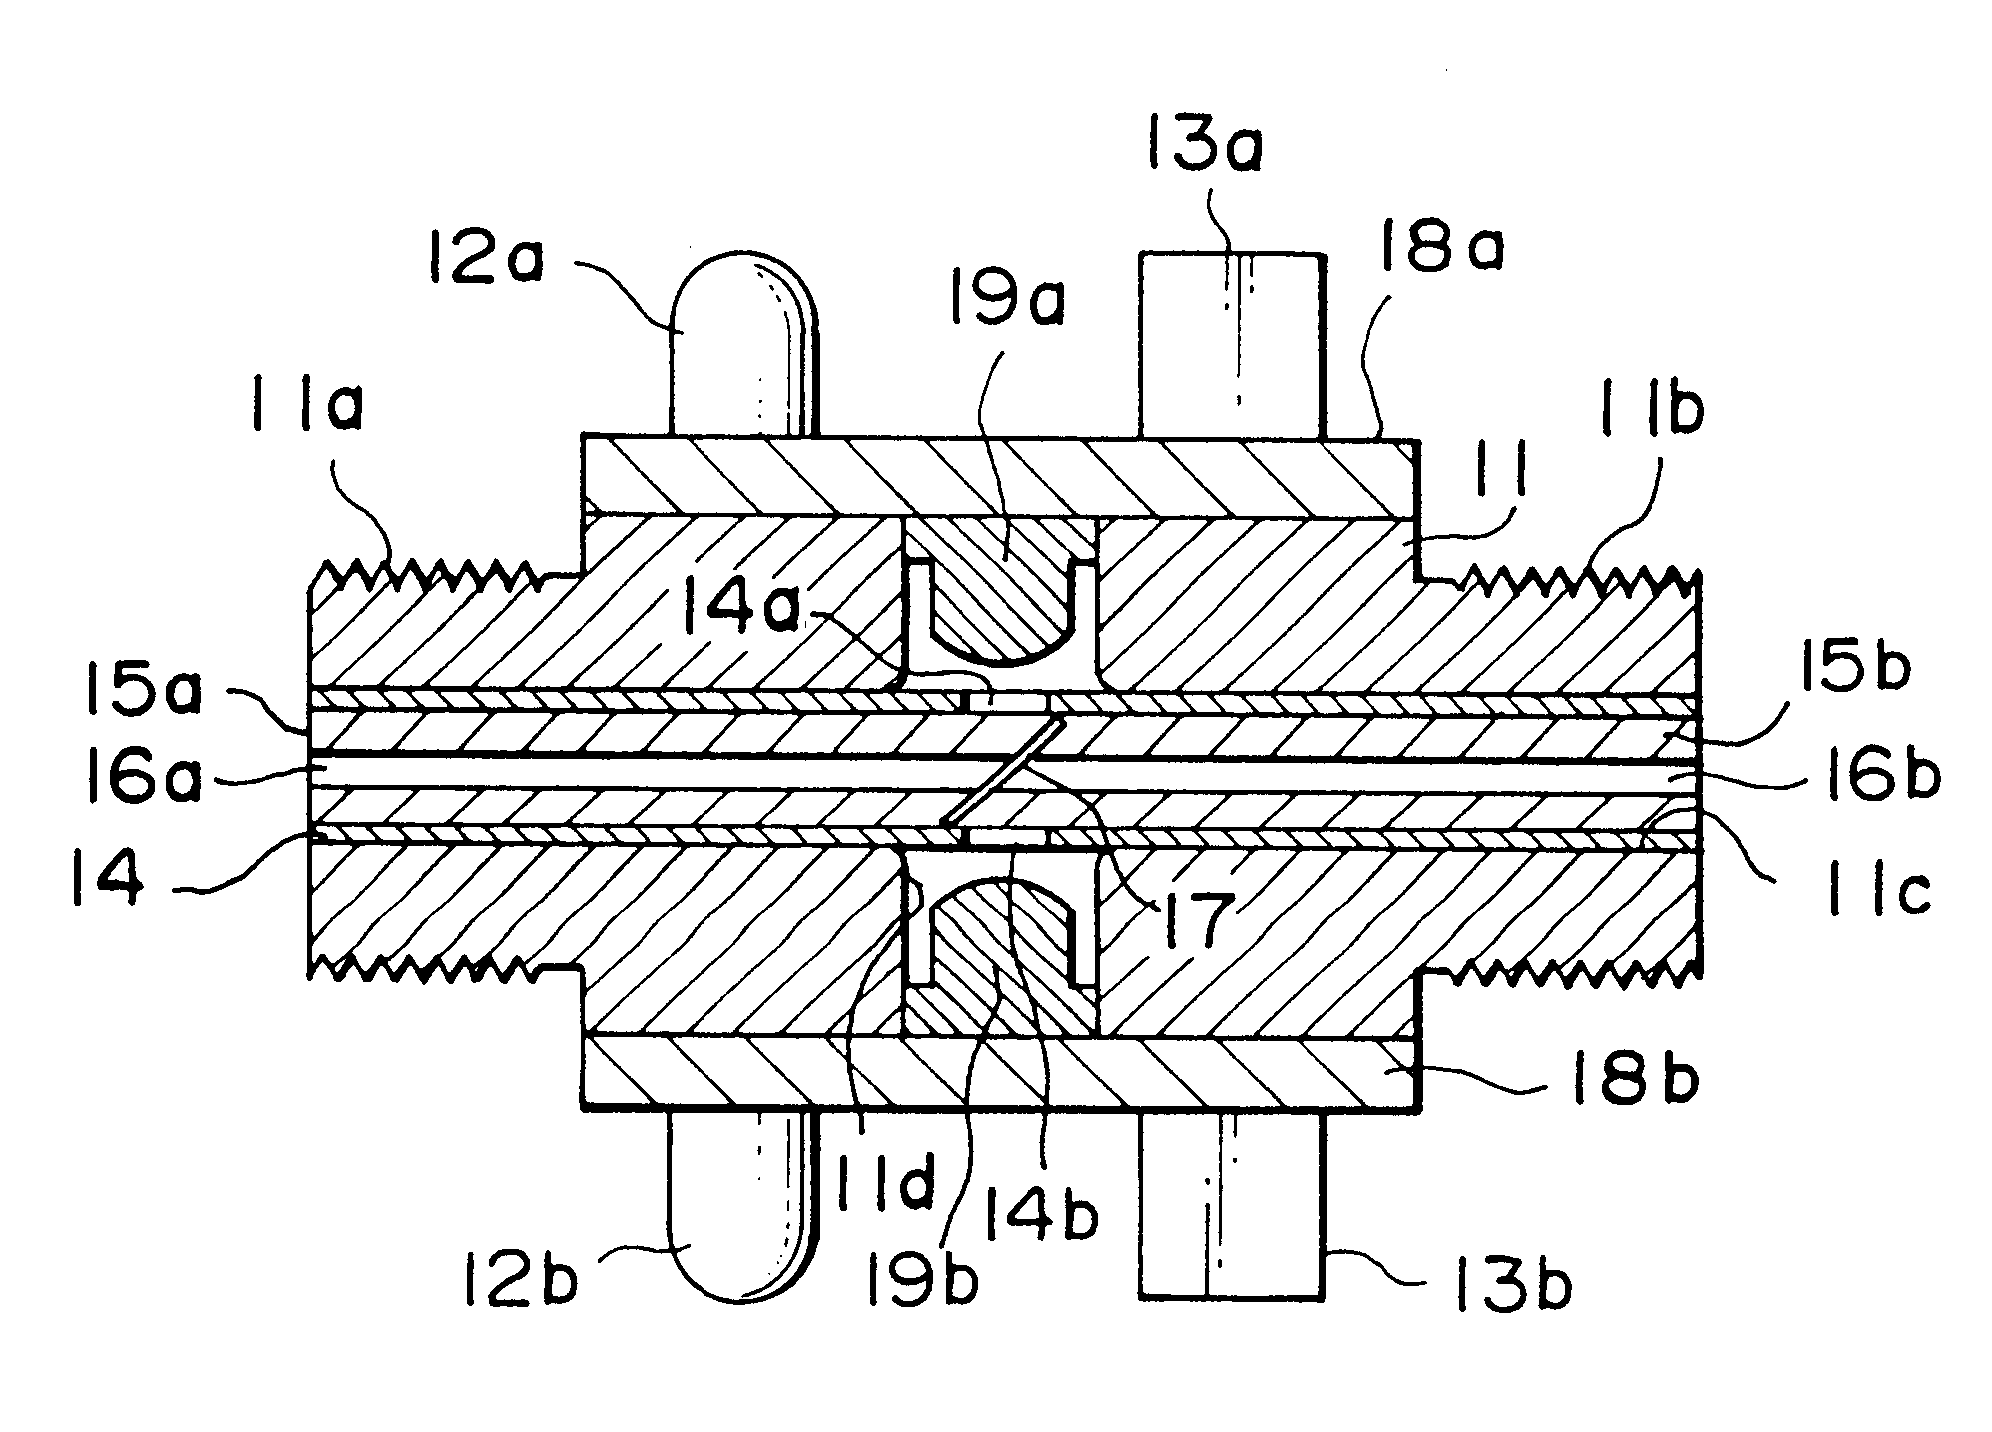 Optical repeating device with monitoring function